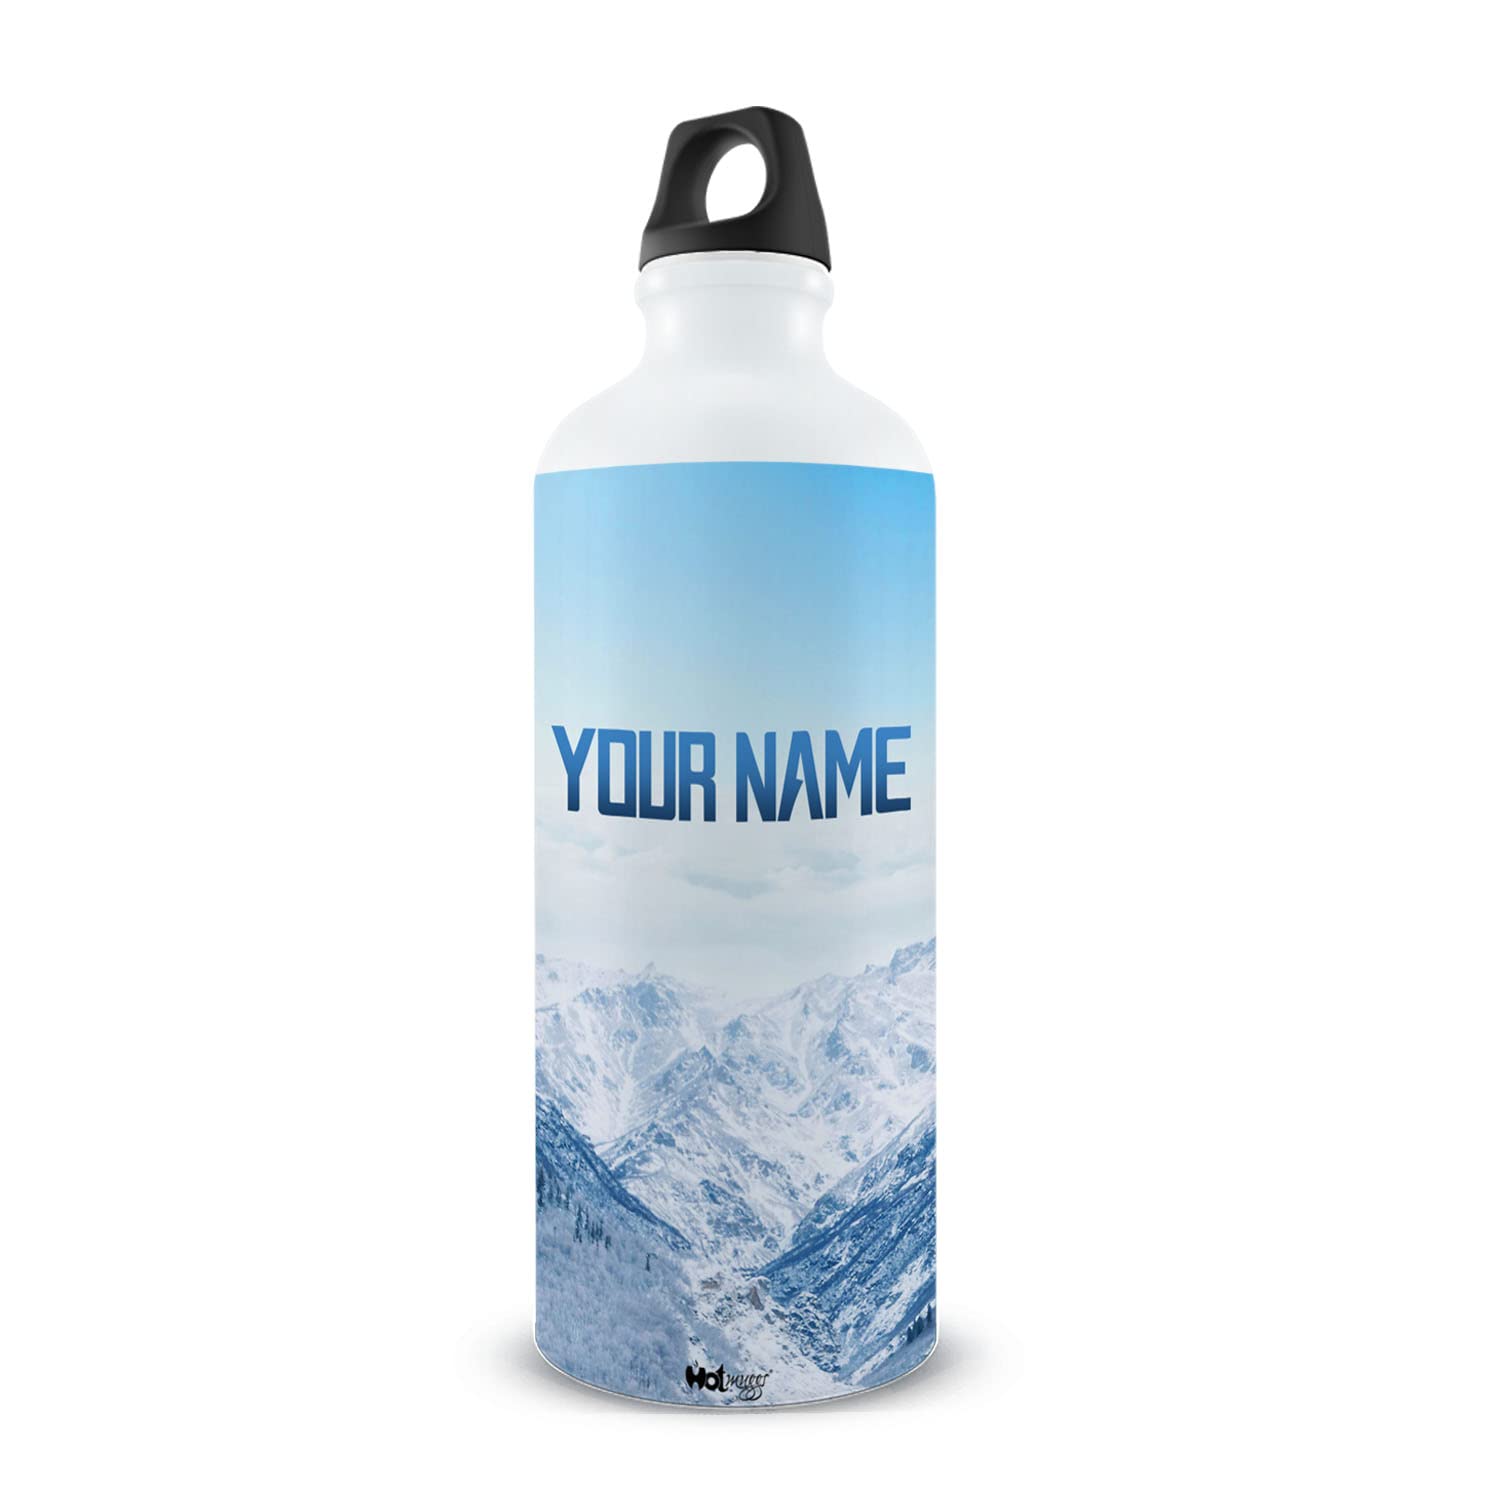 Me Skies Bottle - Personalized Stainless Steel Name Water Bottle, 750ml, 1Pc